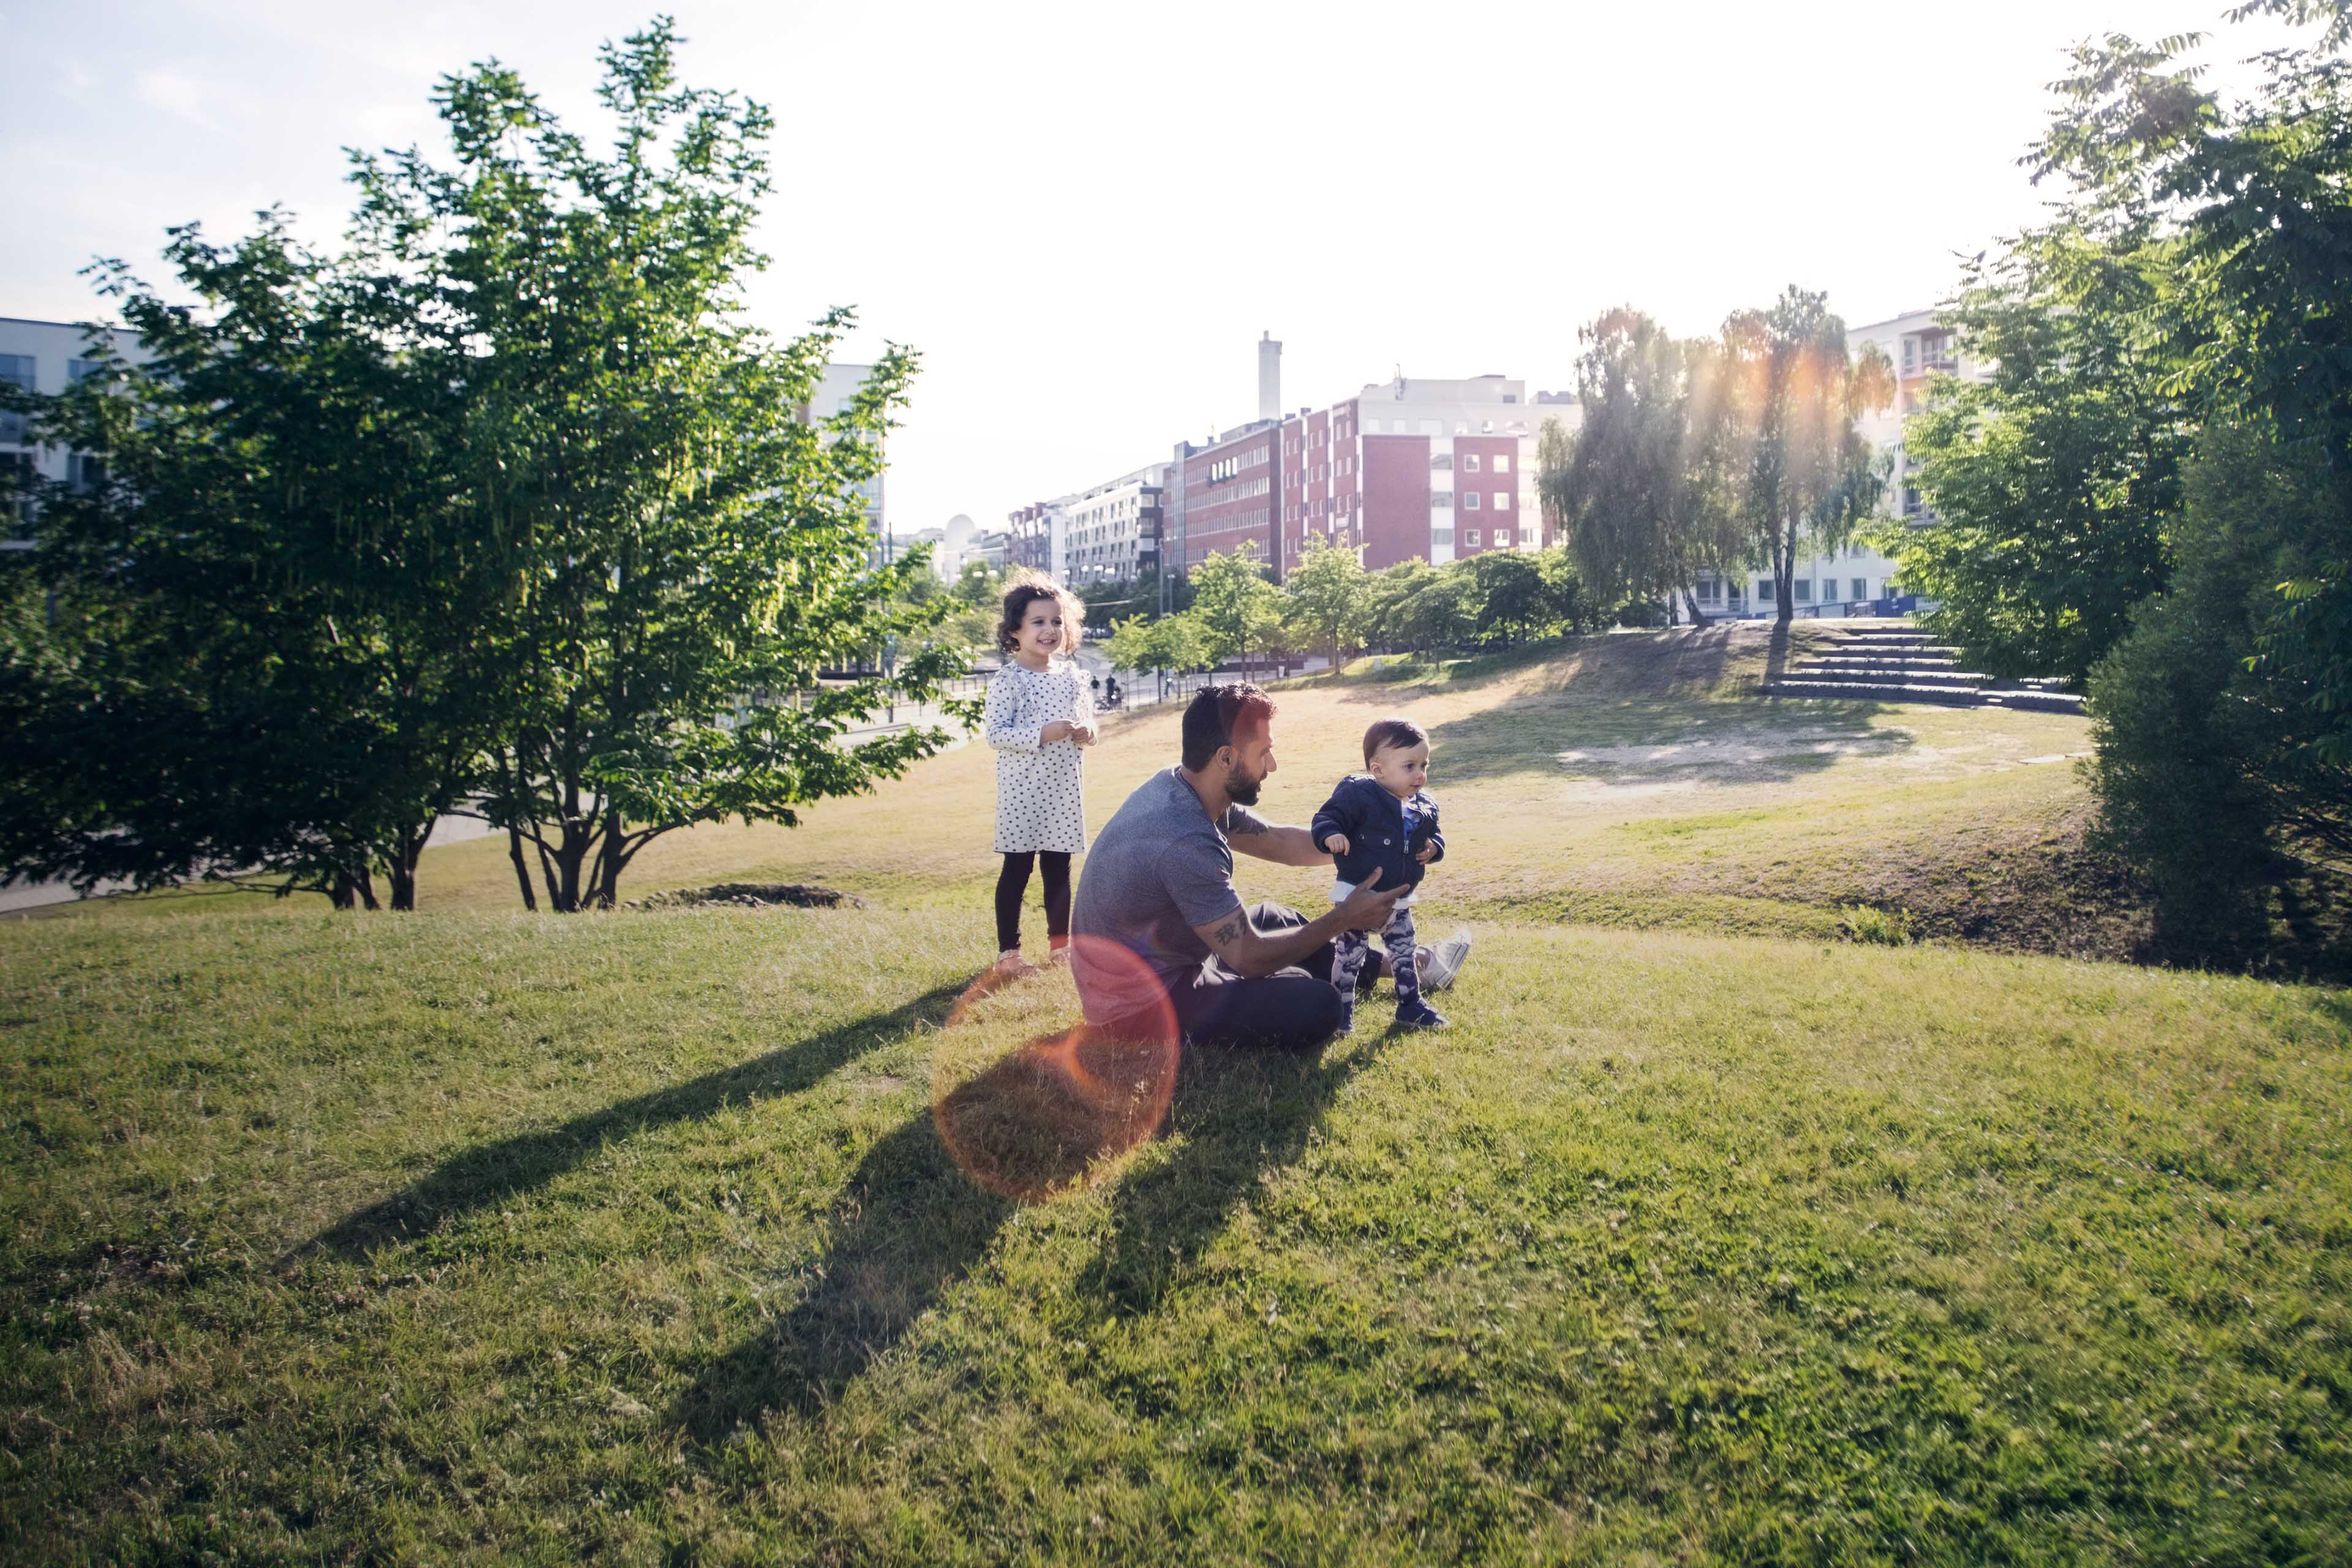 Father playing with children on grassy field